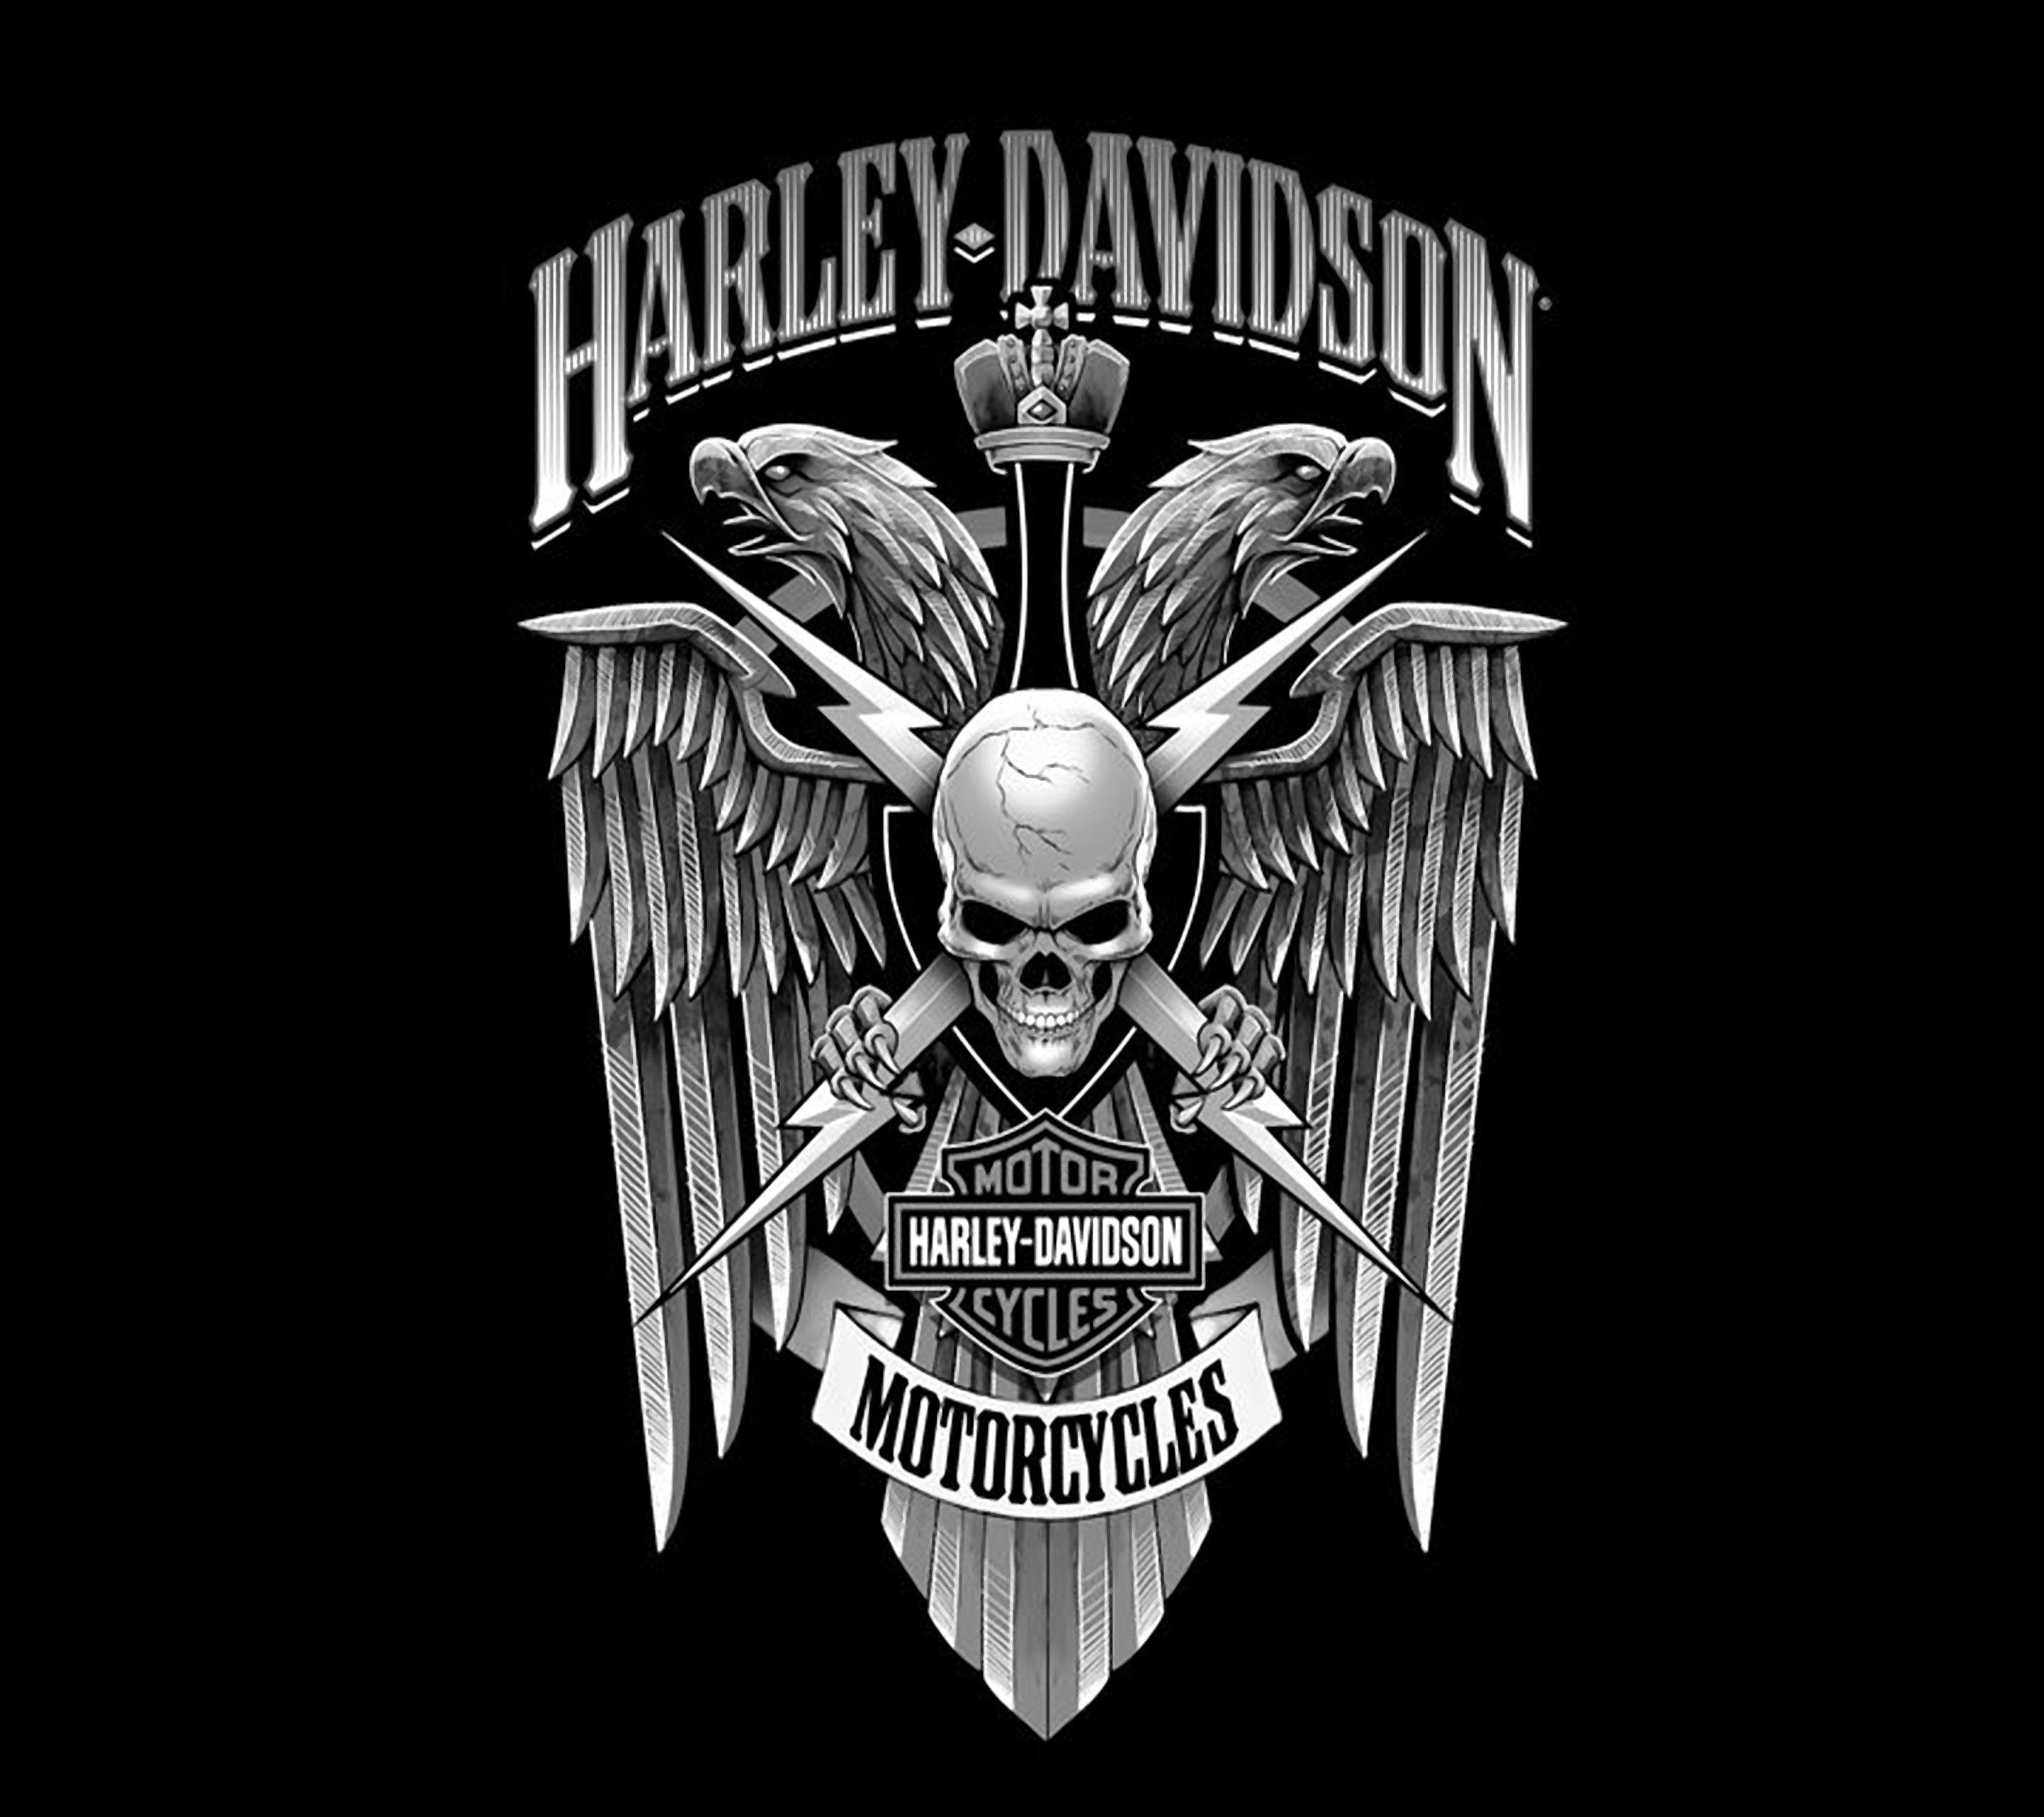 HD Quality Harley Davidson Wallpaper for Free, Picture